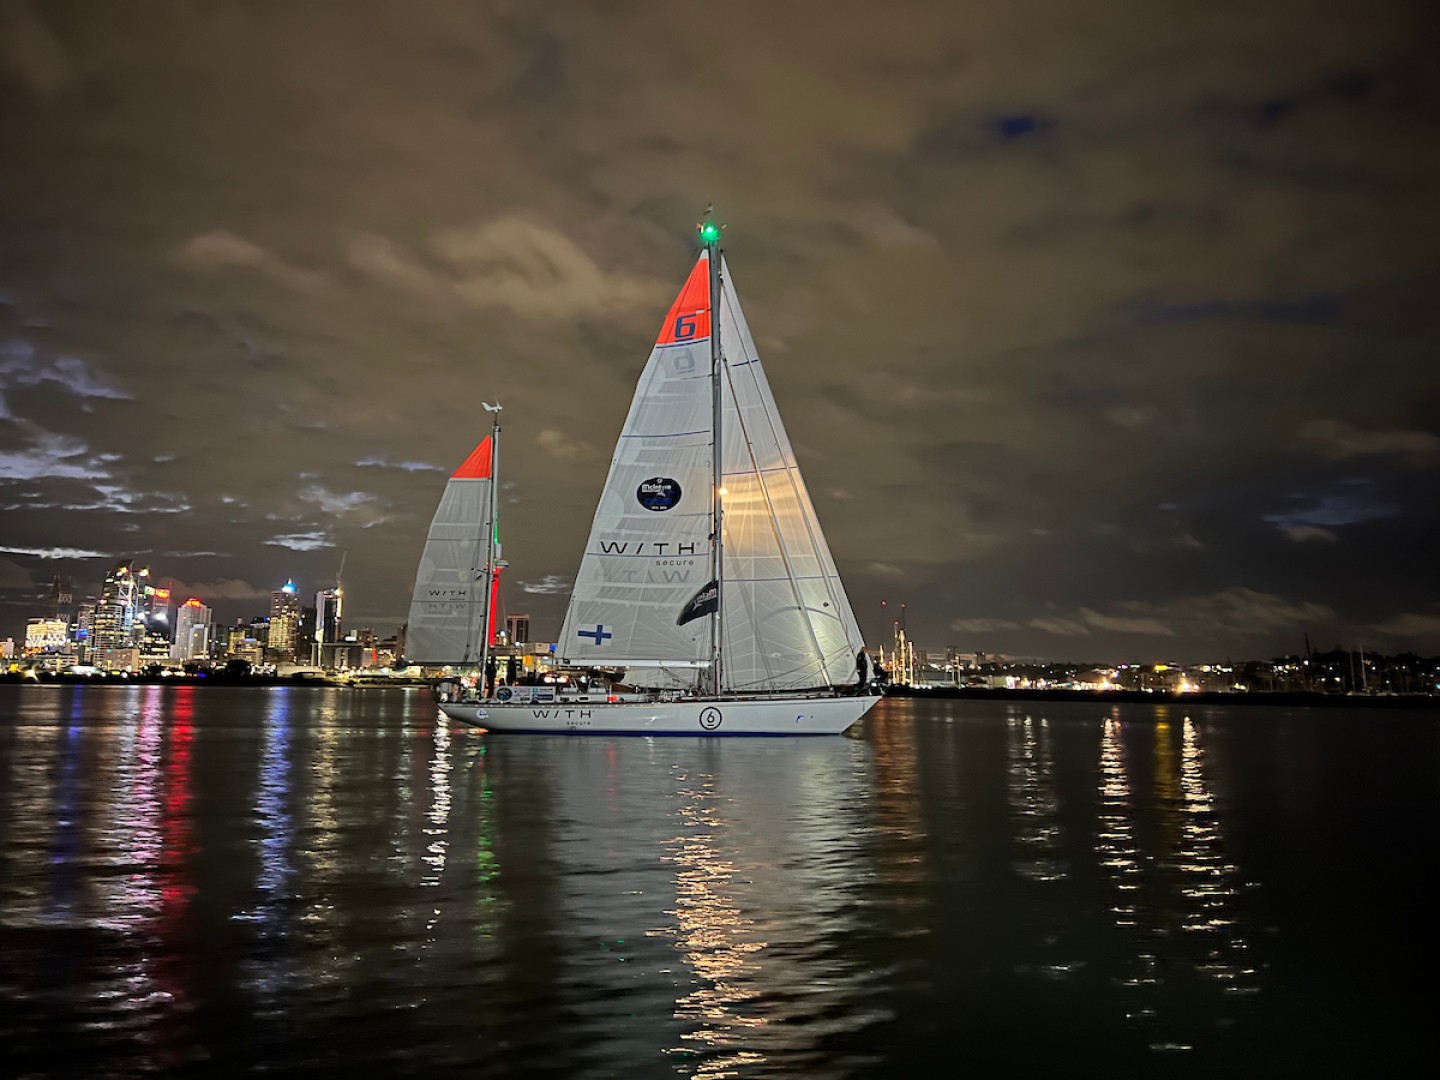 The stunning Finnish Swan 55, the oldest yacht in the race at 53 years old, sailing majestically TOWARD THE FINISH LINE IN Auckland waters AS DAYLIGHT STARTS TO APPEAR. Credit: OGR2023 / Don McIntyre